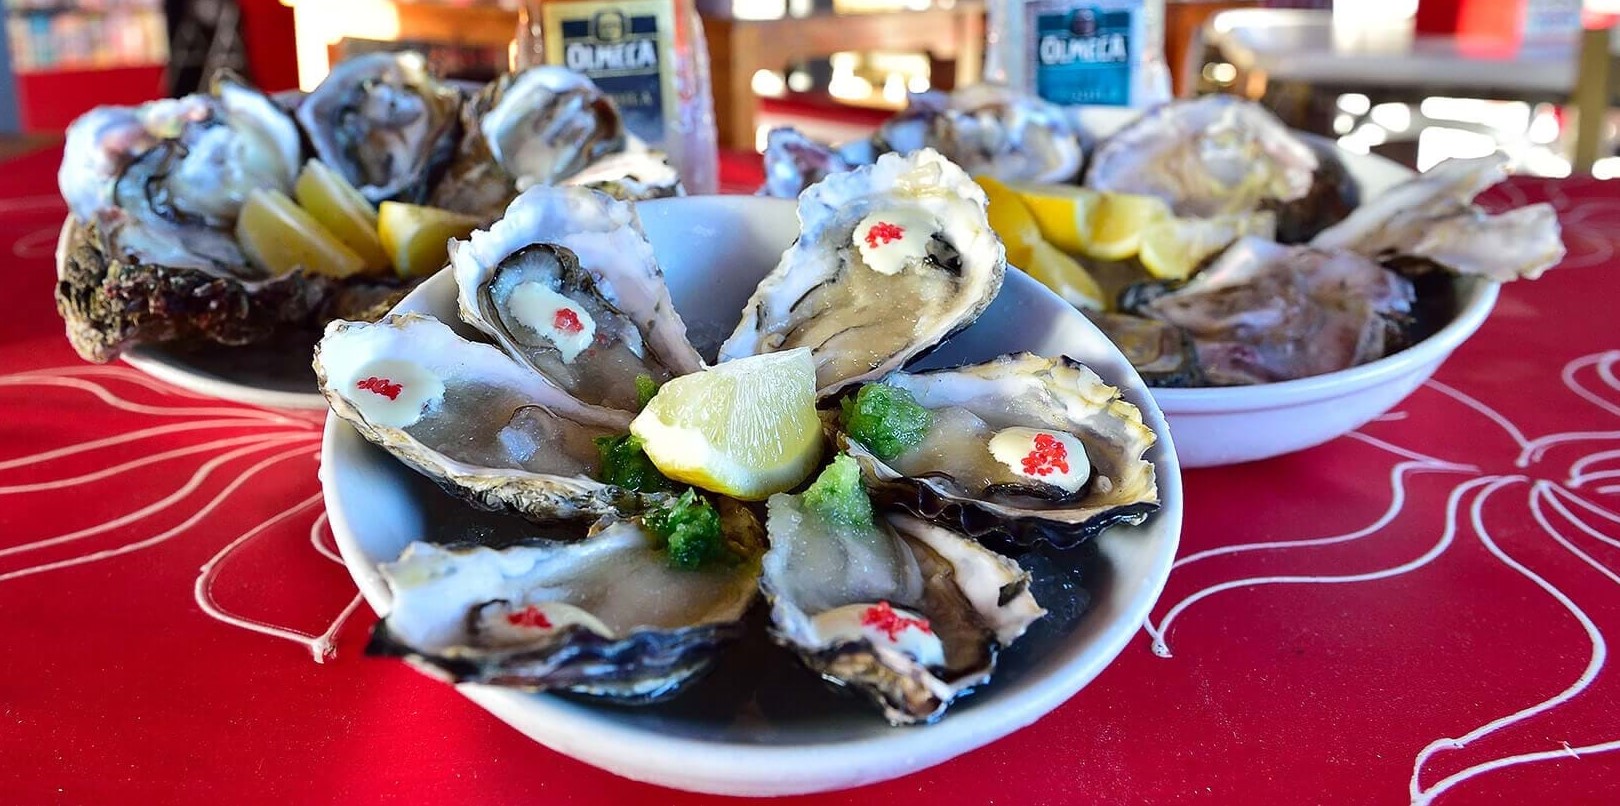 9 Facts About Knysna Oyster Festival